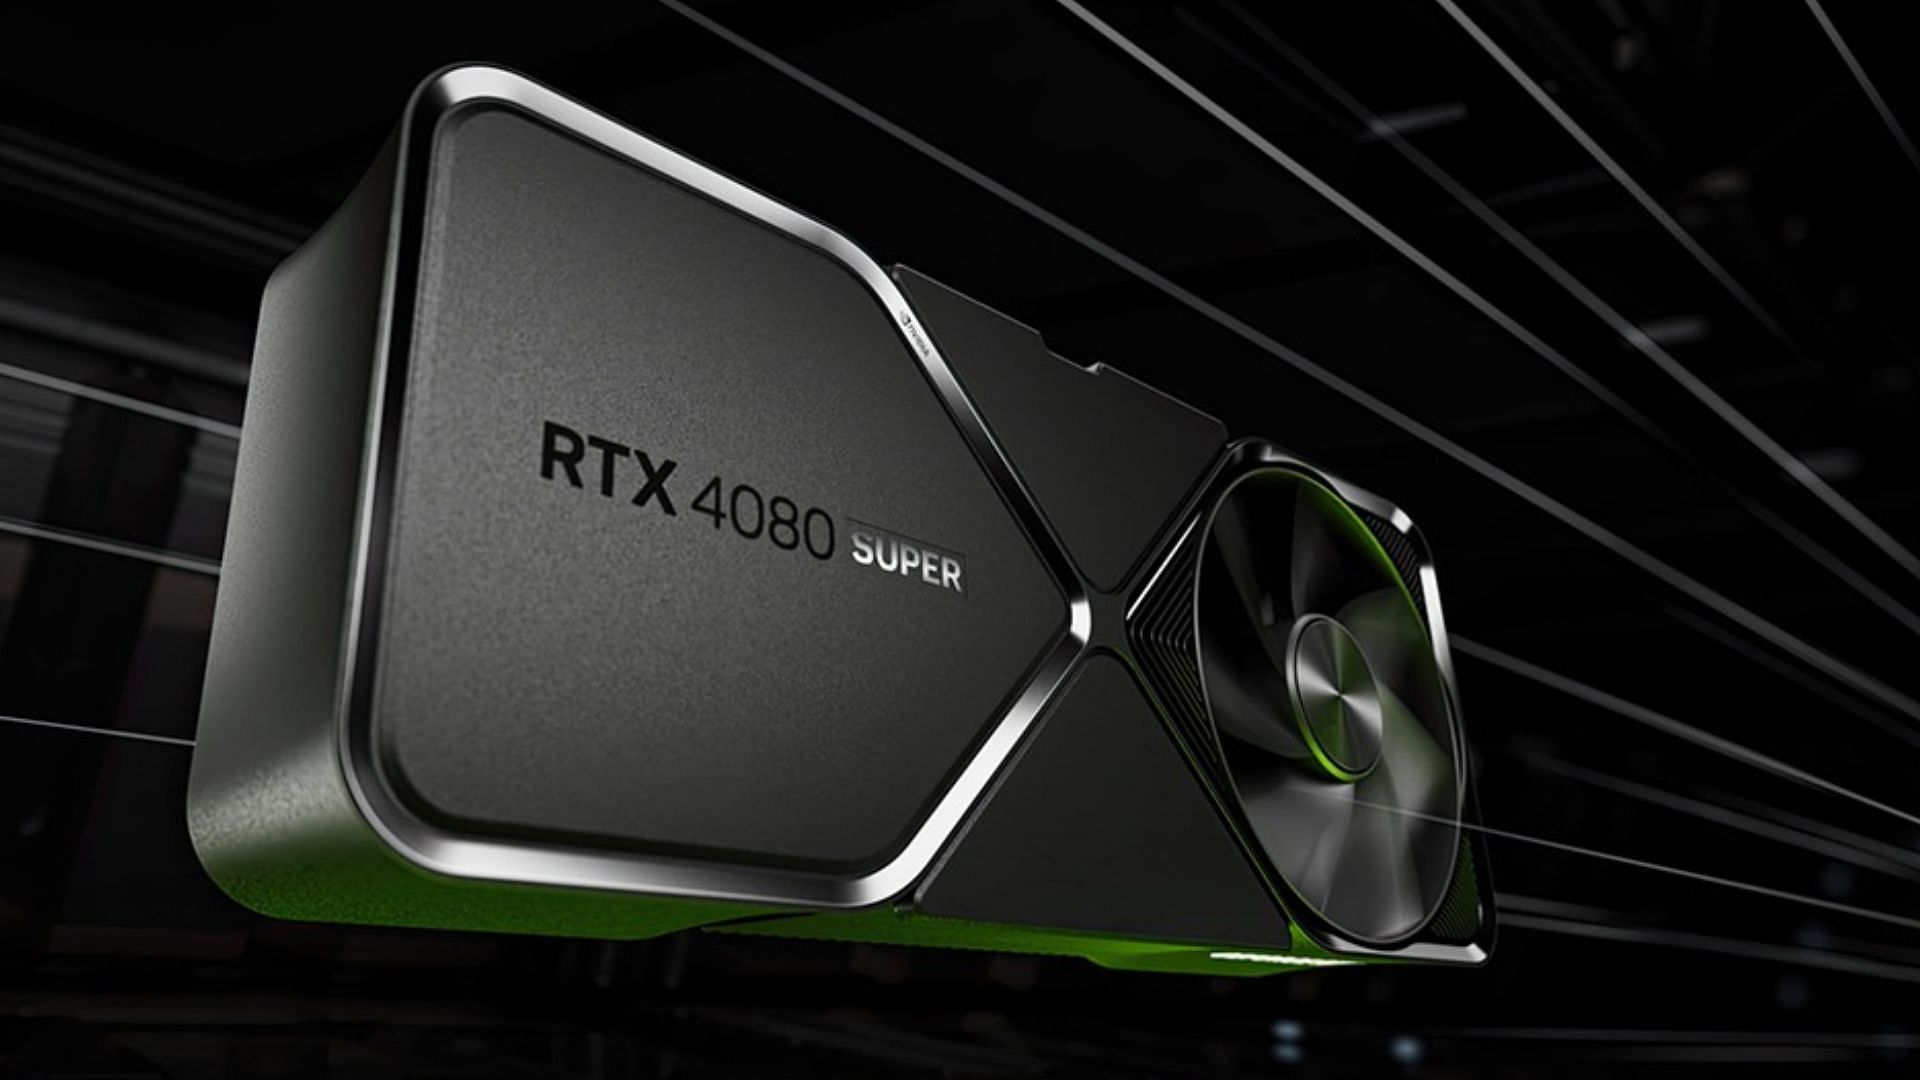 The new Nvidia RTX 4080 Super brings better price-to-performance to the table (Image via Nvidia)